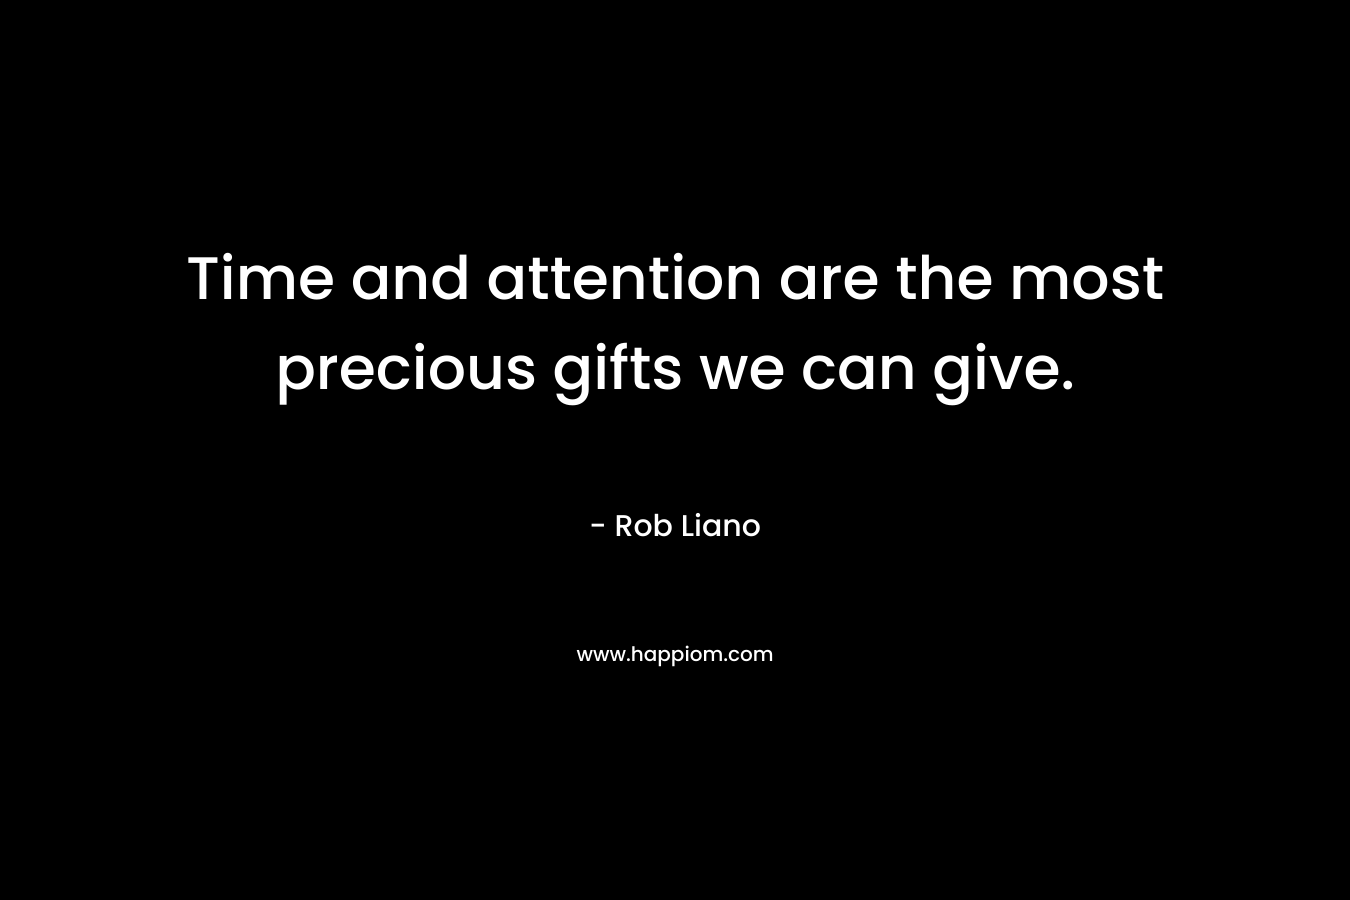 Time and attention are the most precious gifts we can give.